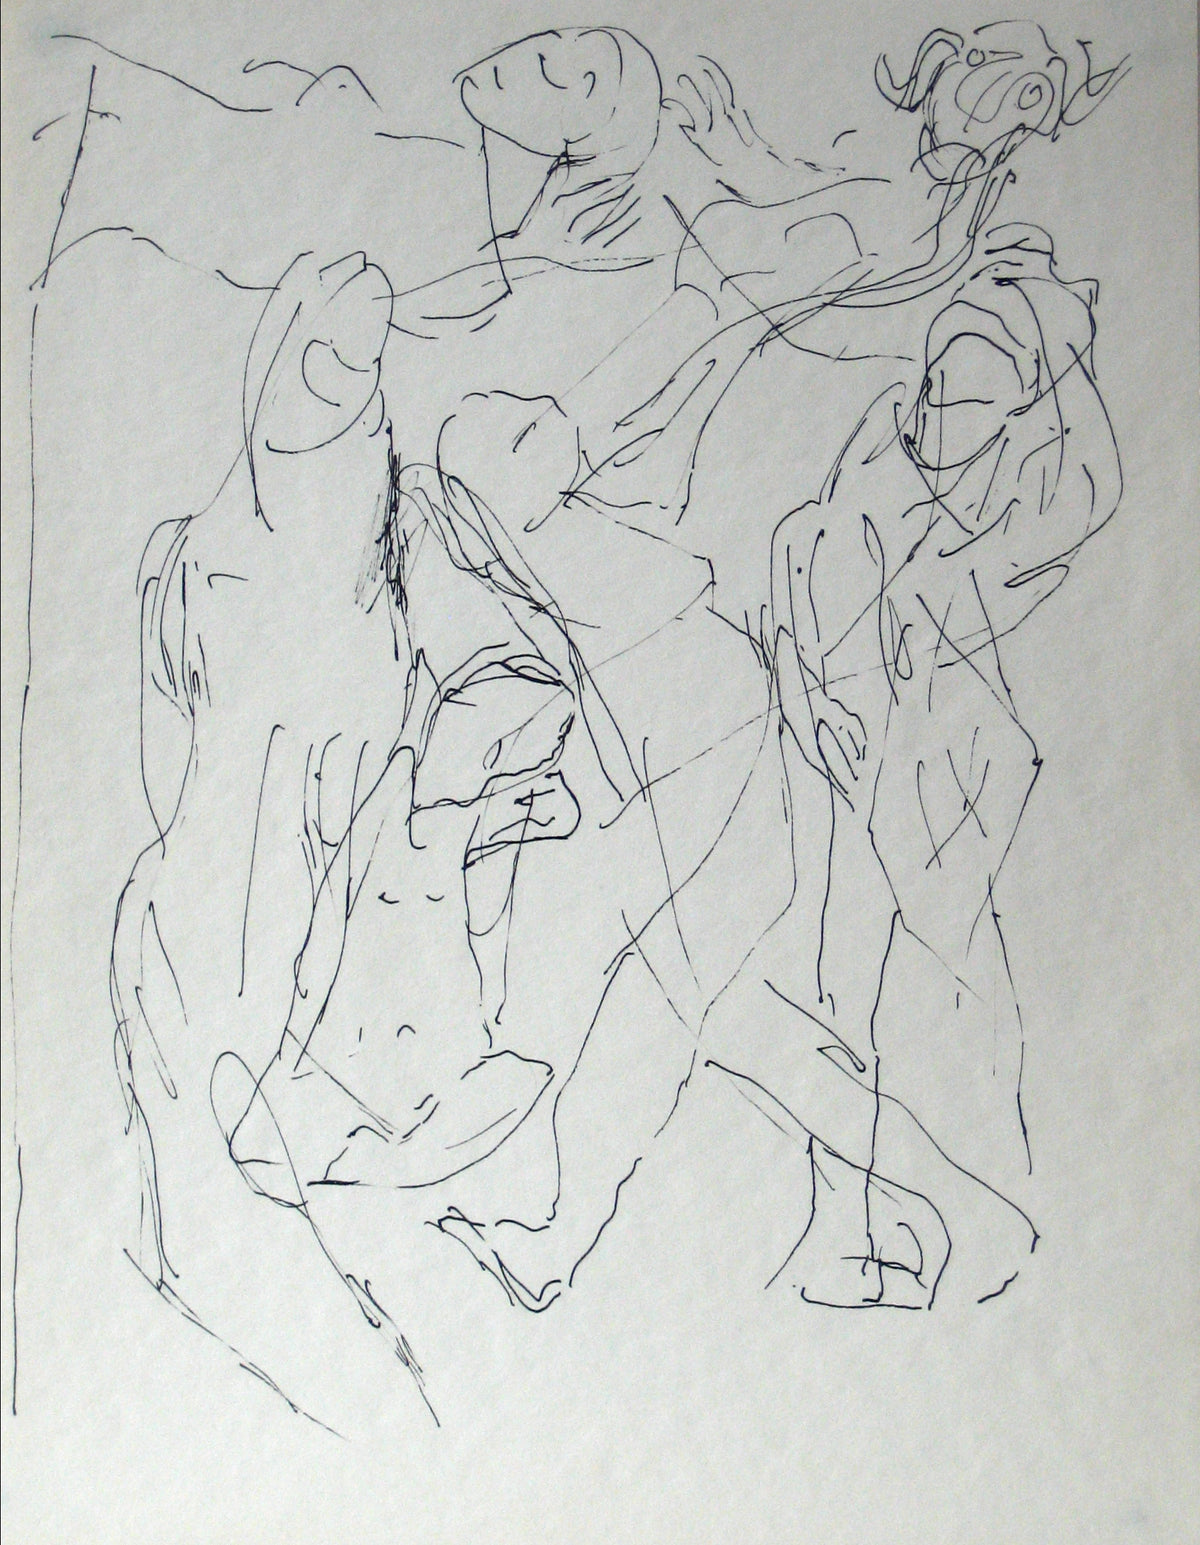 Abstracted Figures in a Scene &lt;br&gt;Early-Mid 20th Century Ink on Paper &lt;br&gt;&lt;br&gt;#13584